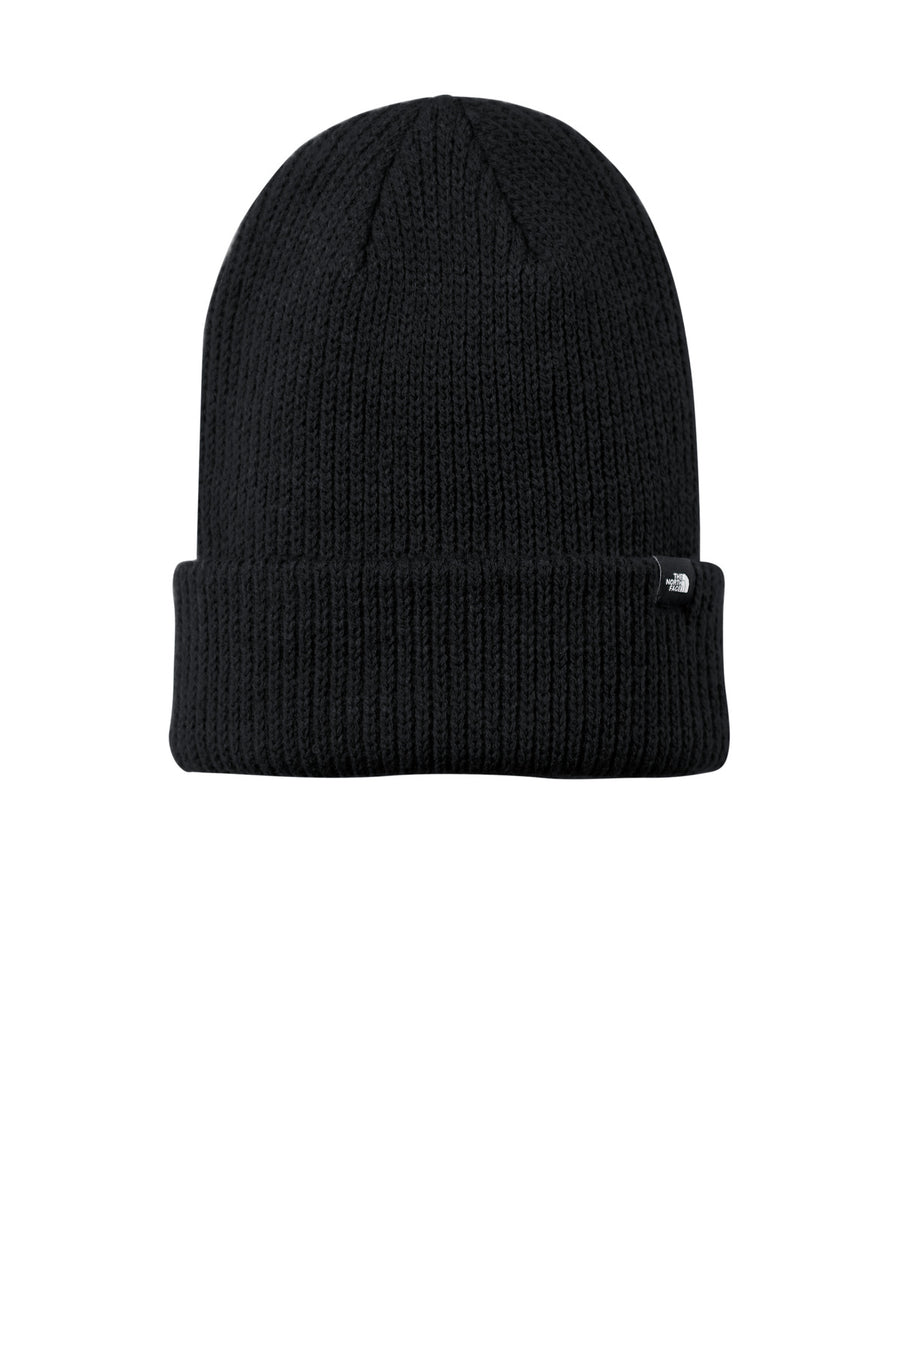 The North Face Truckstop Beanie